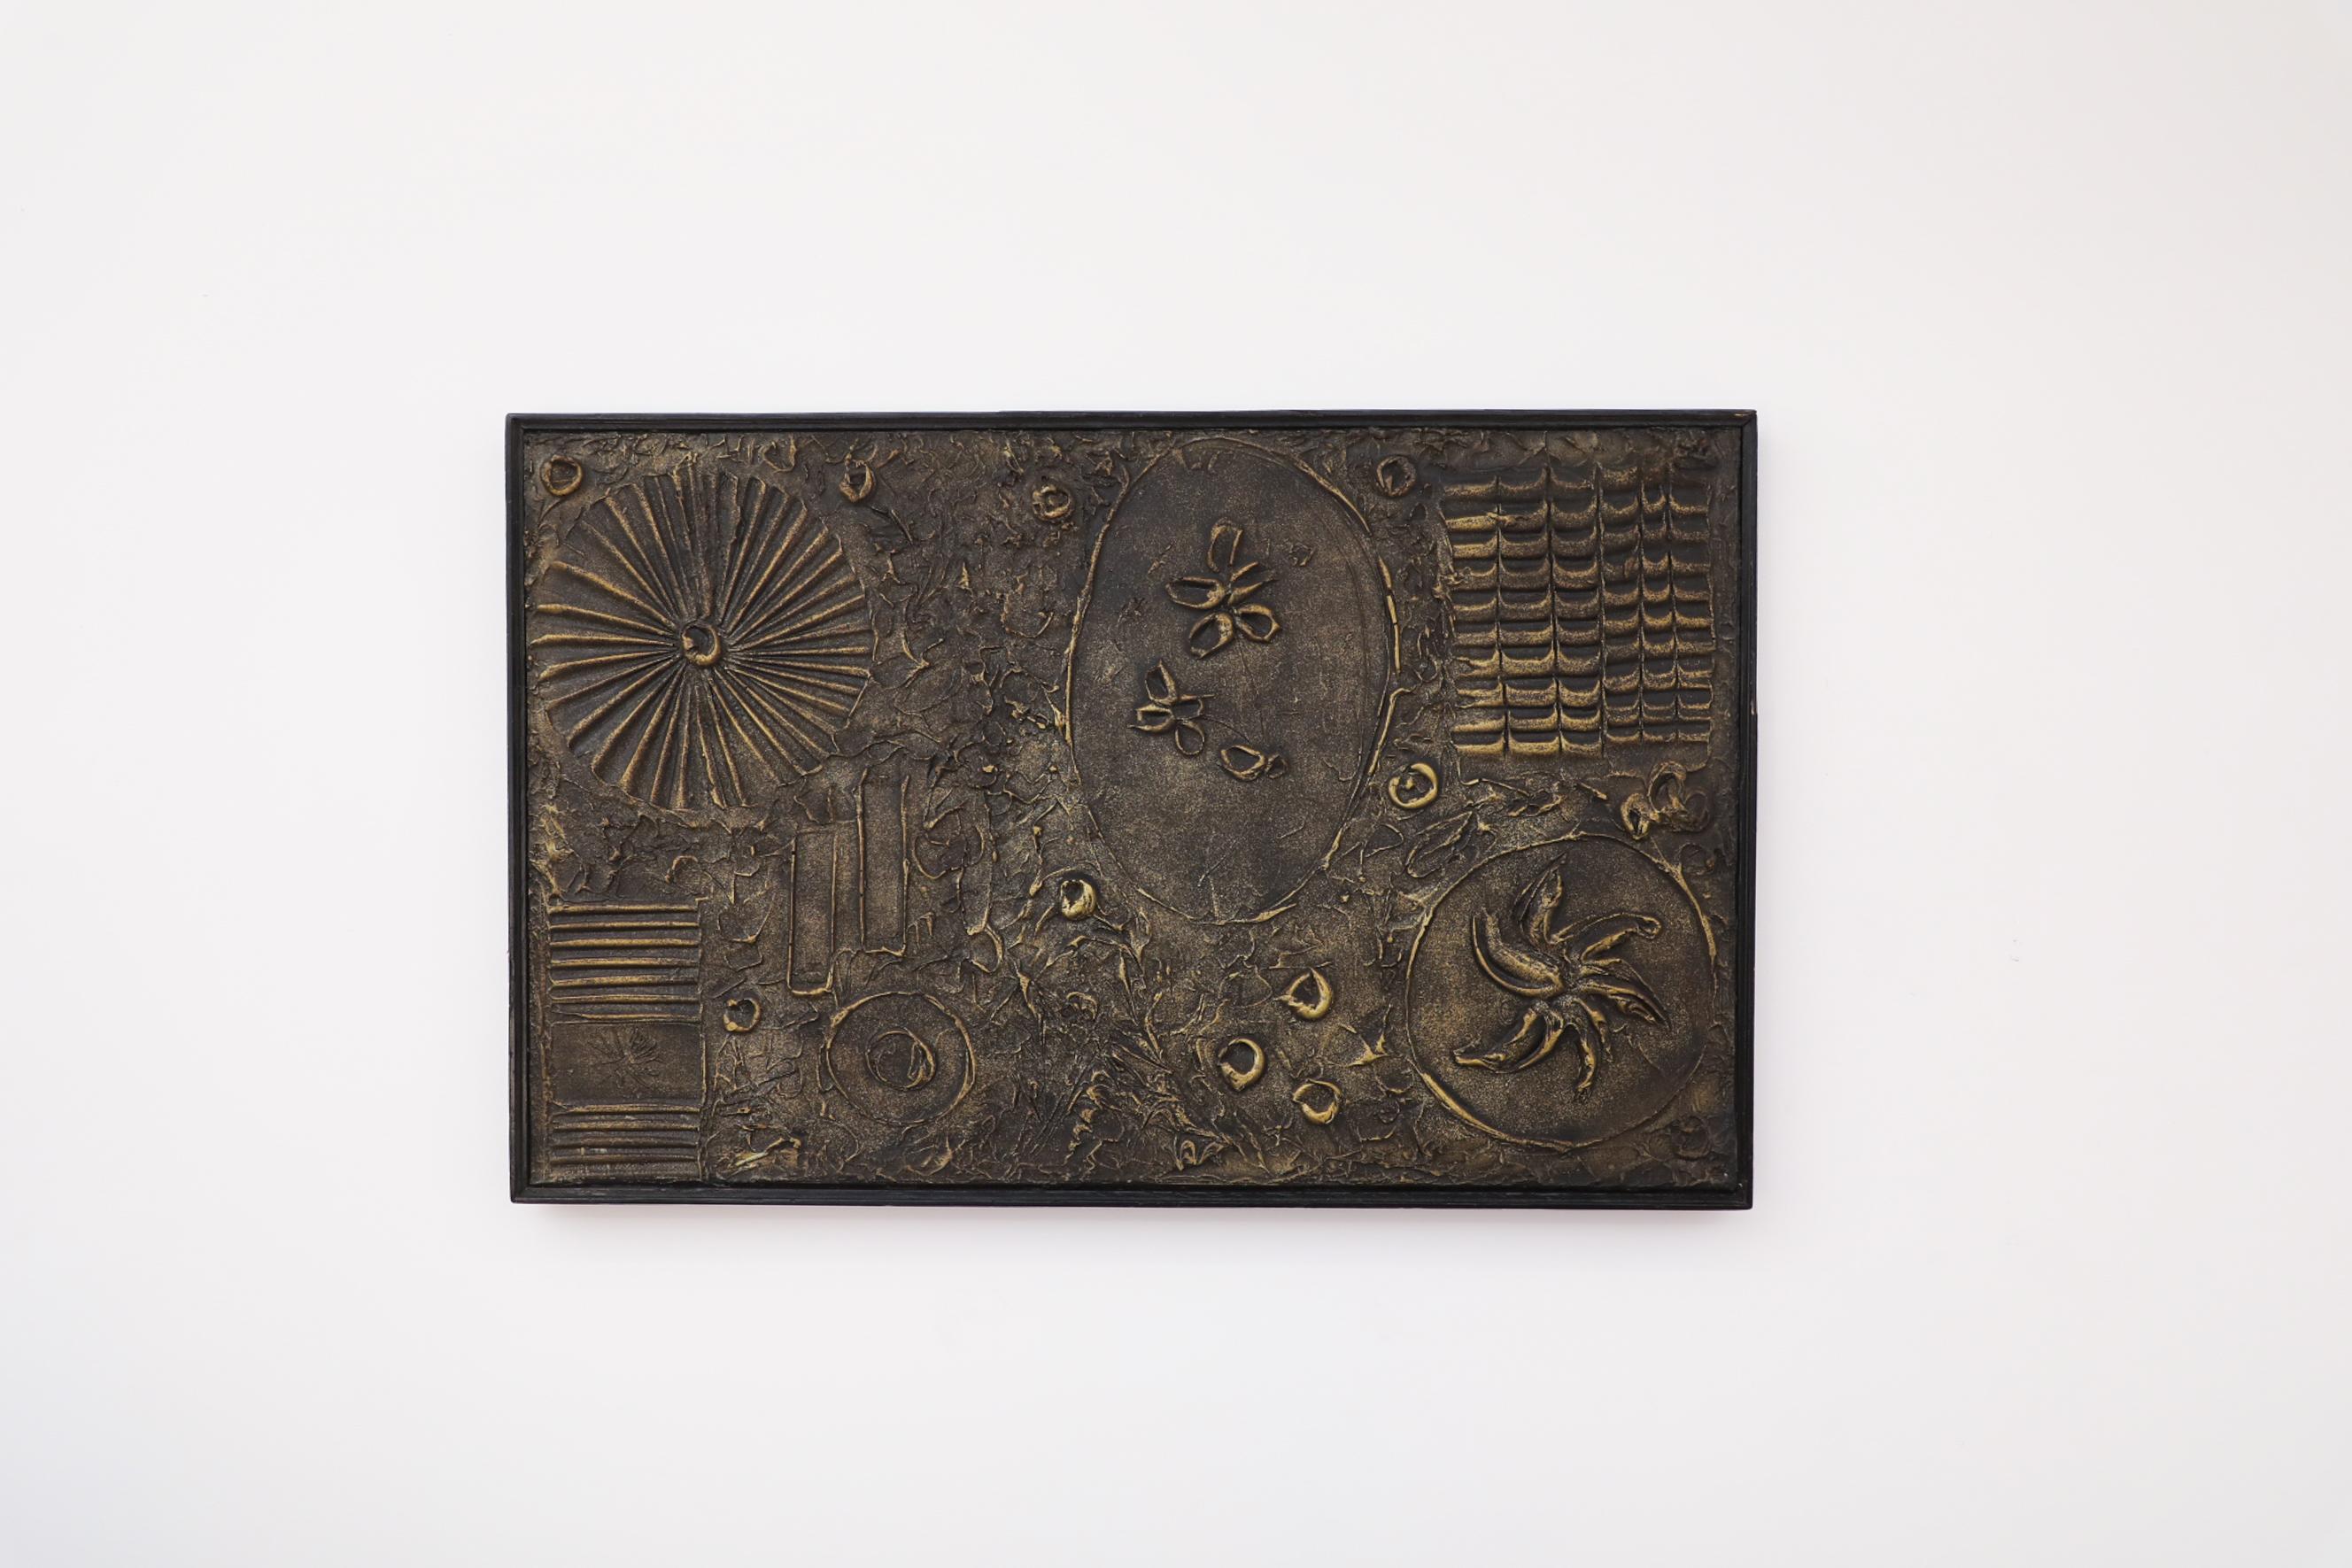 Beautiful Brutalist cast resin decorative relief wall art by Adrian Pearsall, most likely inspired by the groundbreaking work of Paul Evans. In original condition, with visible wear and patina including some chipping and color loss. It's wear is